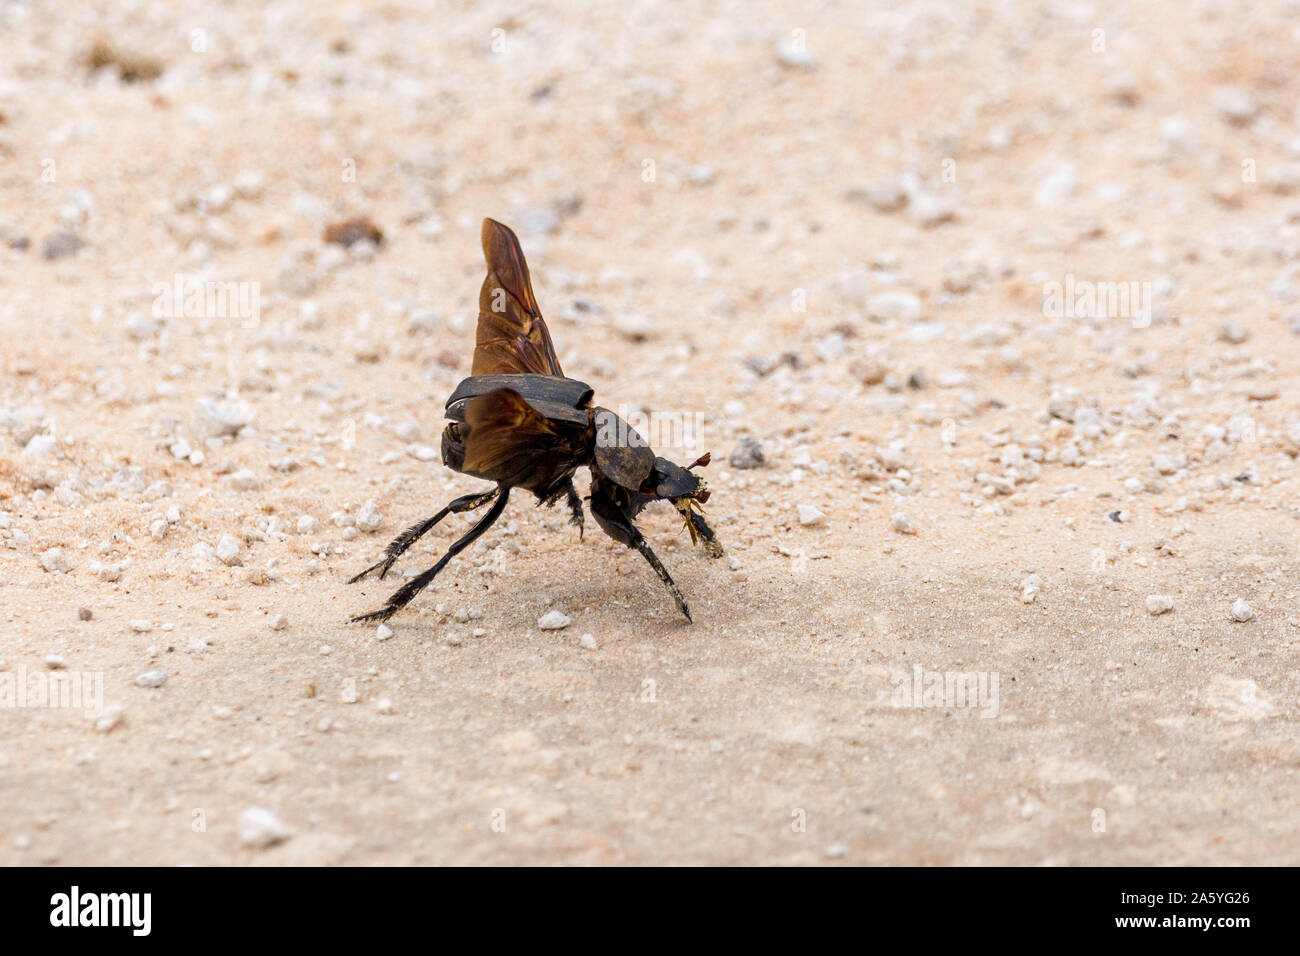 Dung beetle takes off from the ground, Namibia, Africa Stock Photo